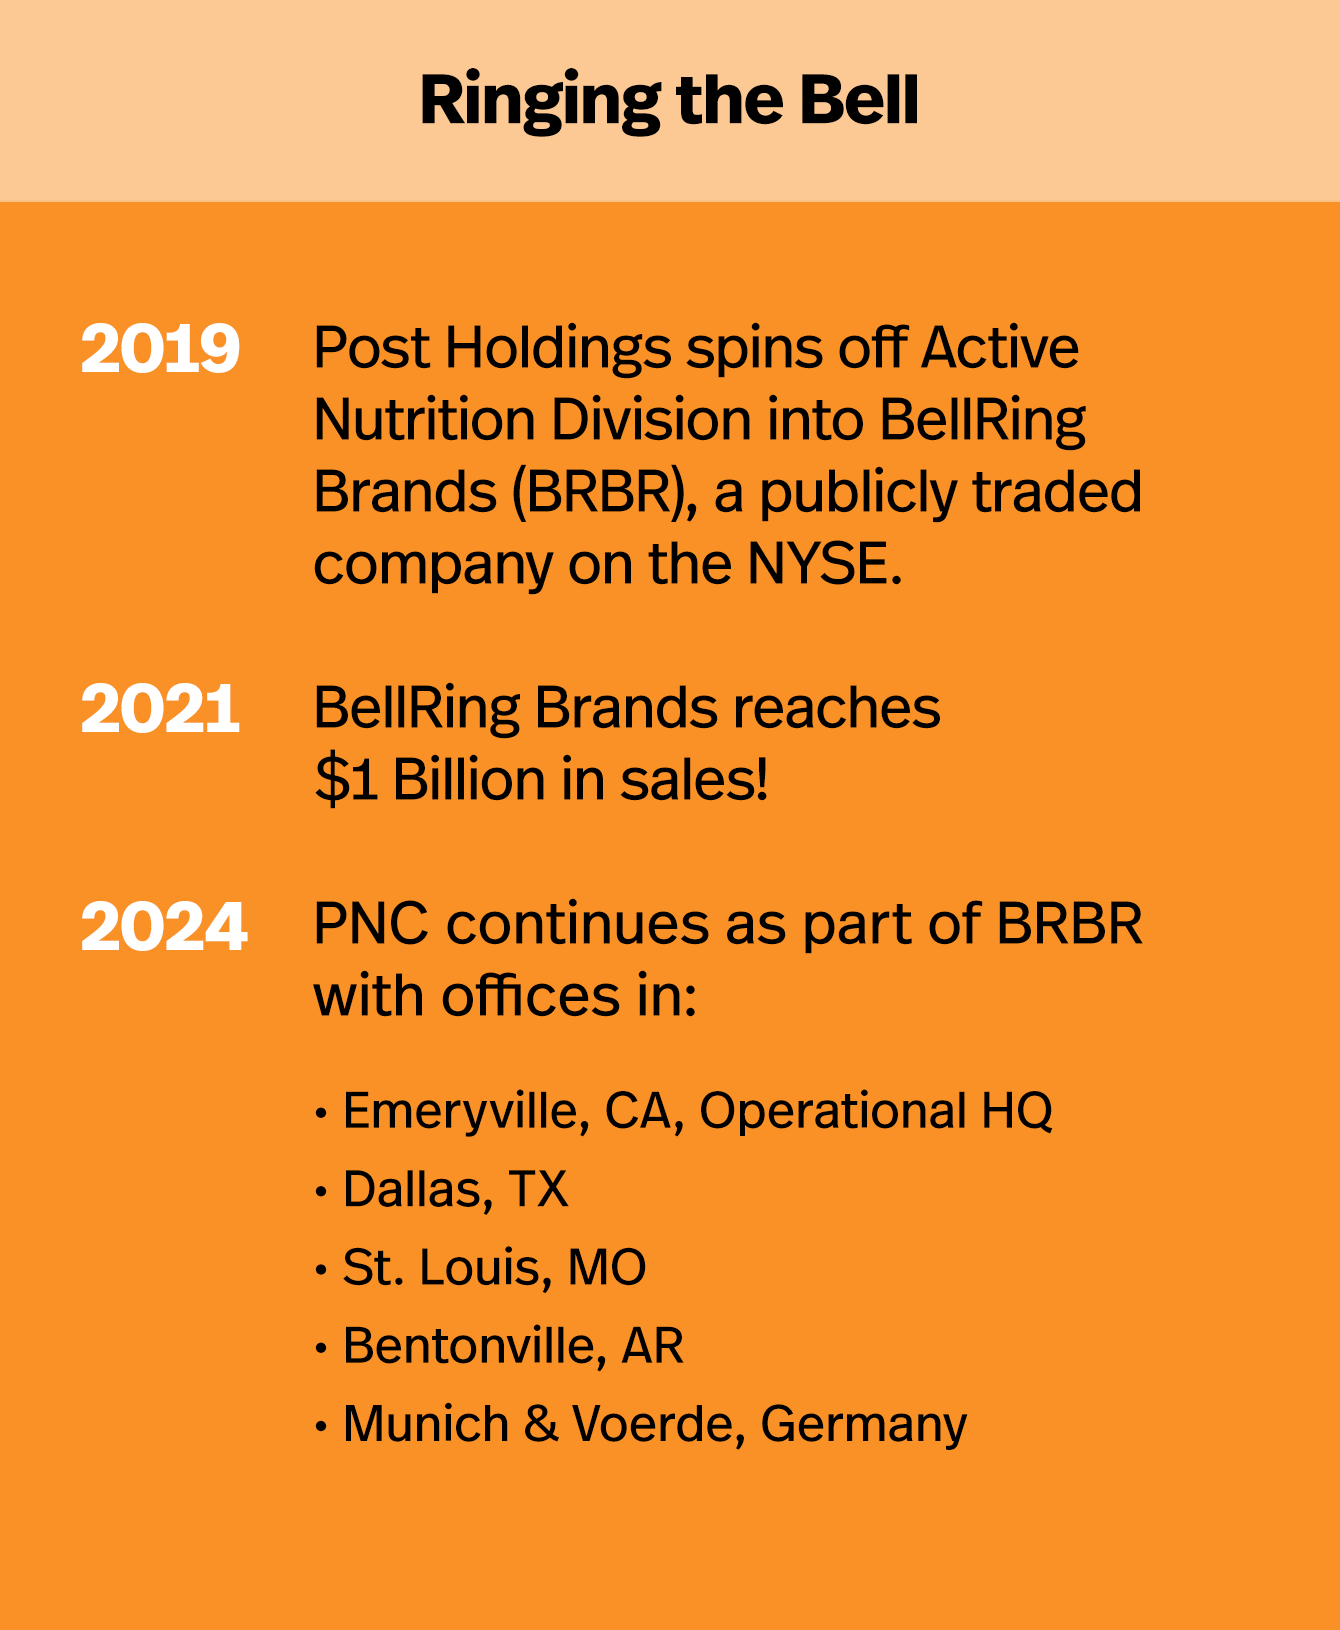 2019: Post Holdings spins active Nutrition Division into BellRing Brands (BRBR), a publicly traded company on the NYSE. 2021: BellRing Brands reaches$1 Billion in sales! 2024: PNC continues to operate as part of BellRing Brands with offices in:Emeryville, CA, Operational HQ, Dallas, TX, St. Louis, MO, Bentonville, AR, Munich, Germany